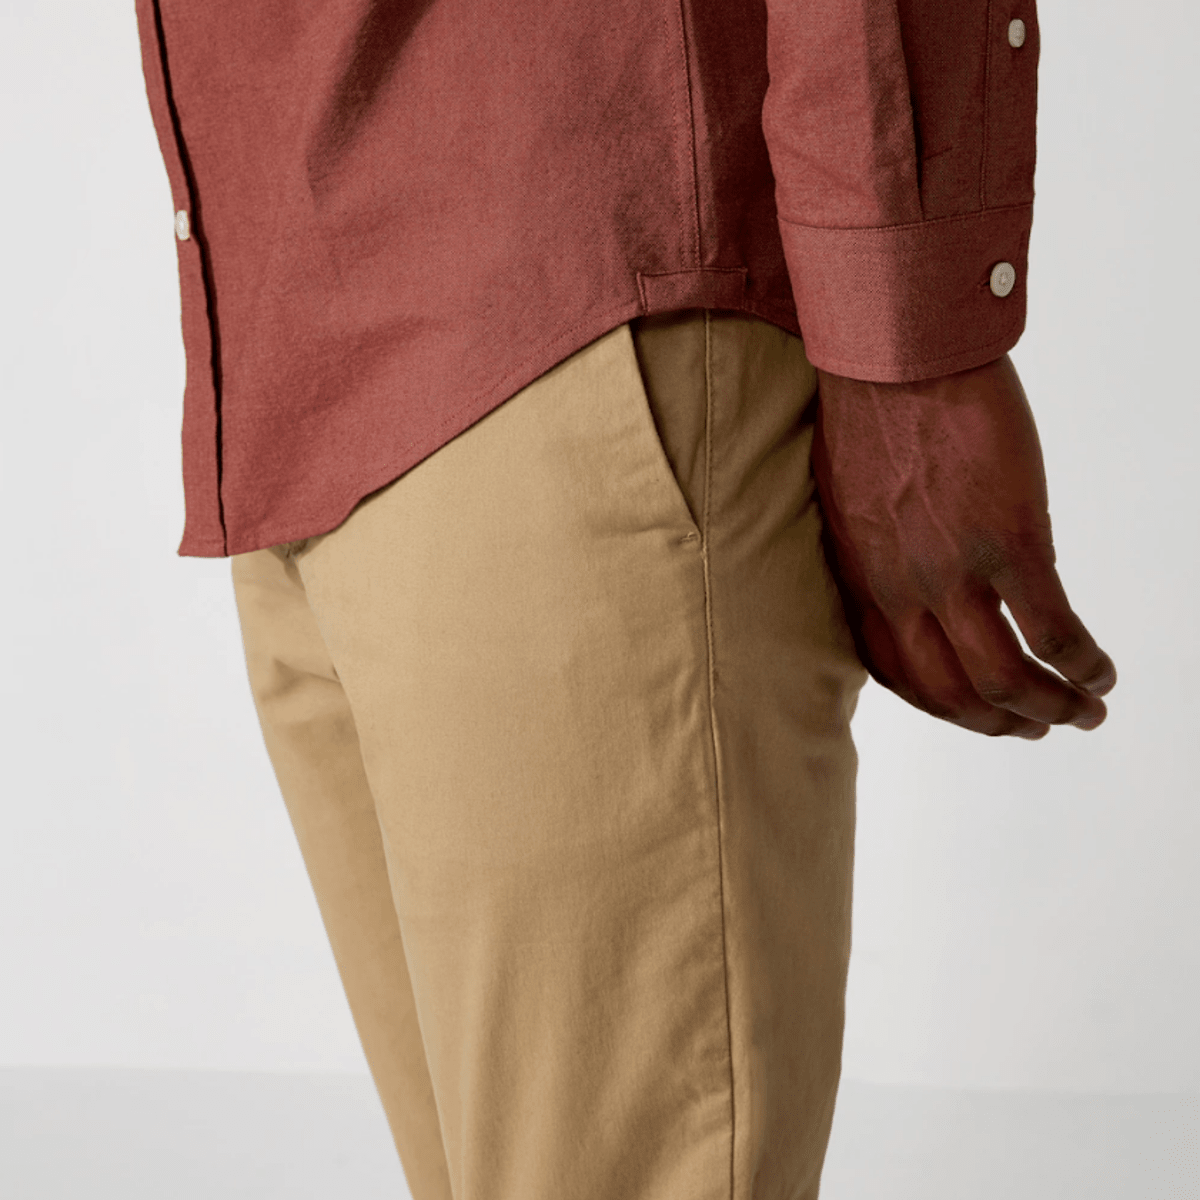 The 15 Best Pants for Men to Buy in 2022  The Manual